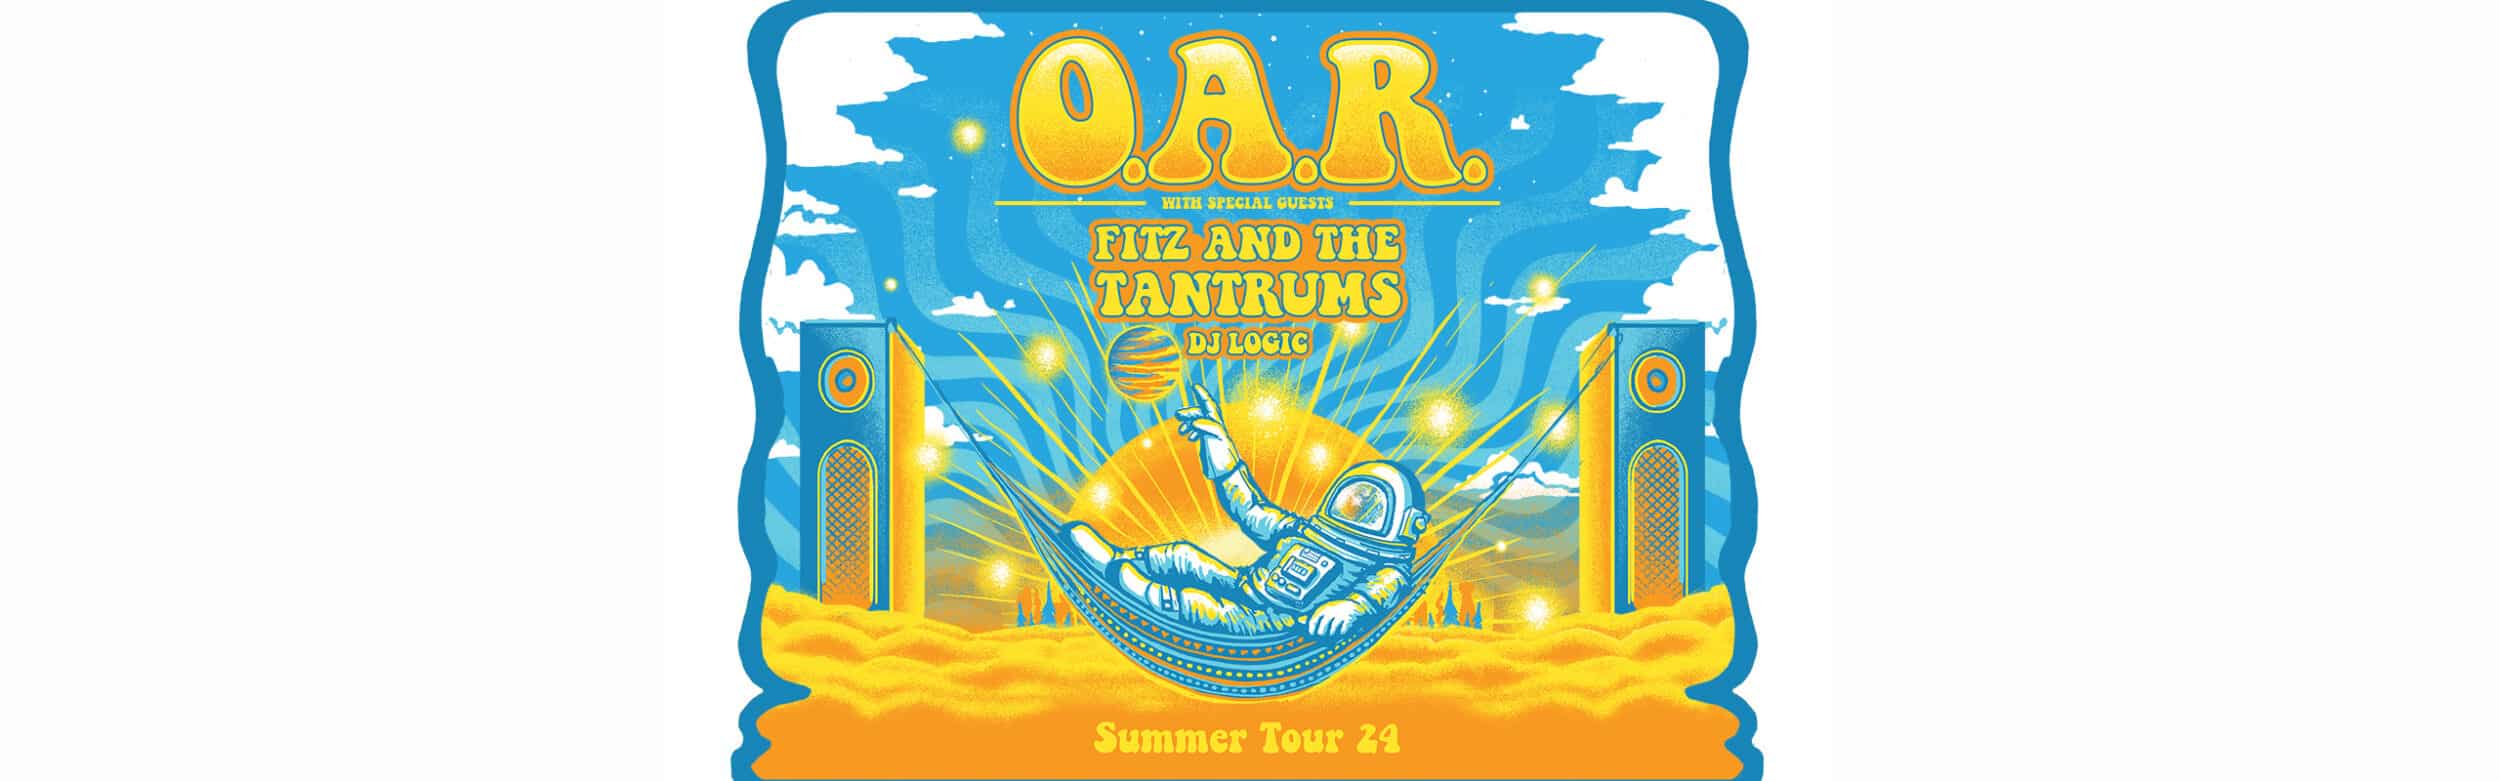 O.A.R. Summer Tour 24 with special guest Fitz and the Tantrums